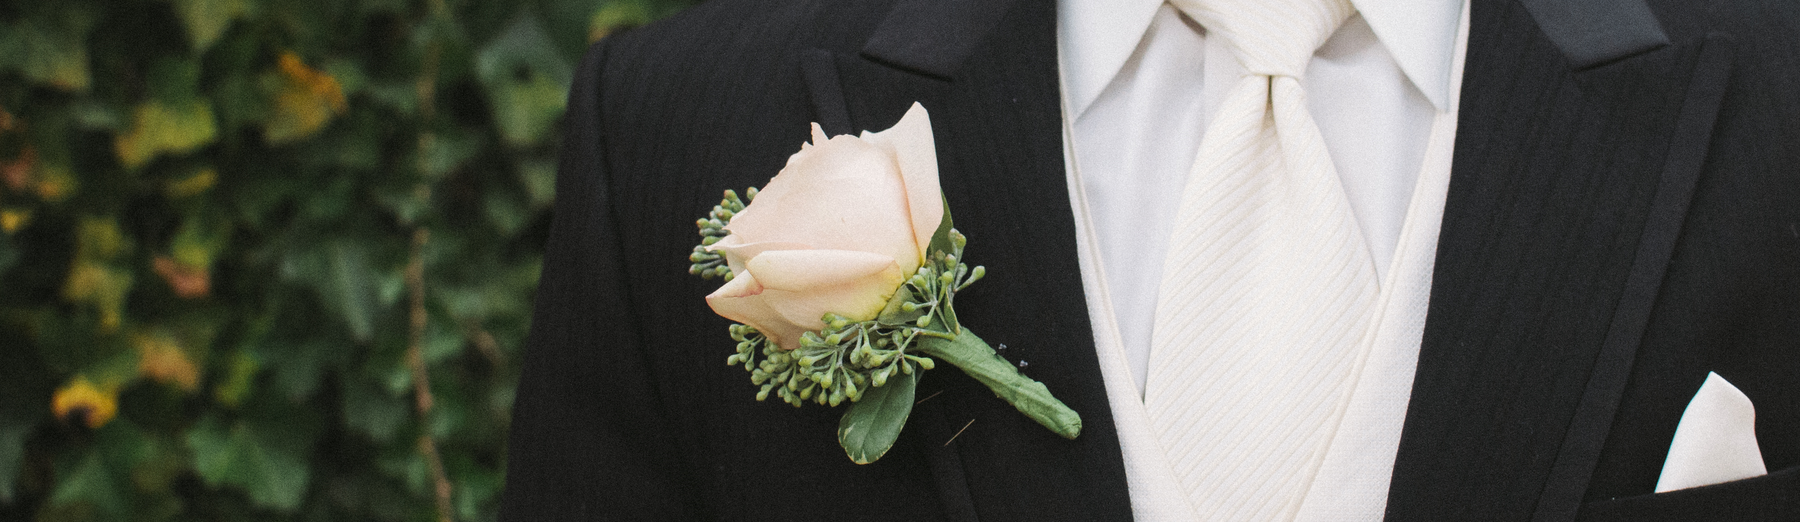 A Floral Boutonniere On A Tuxedo